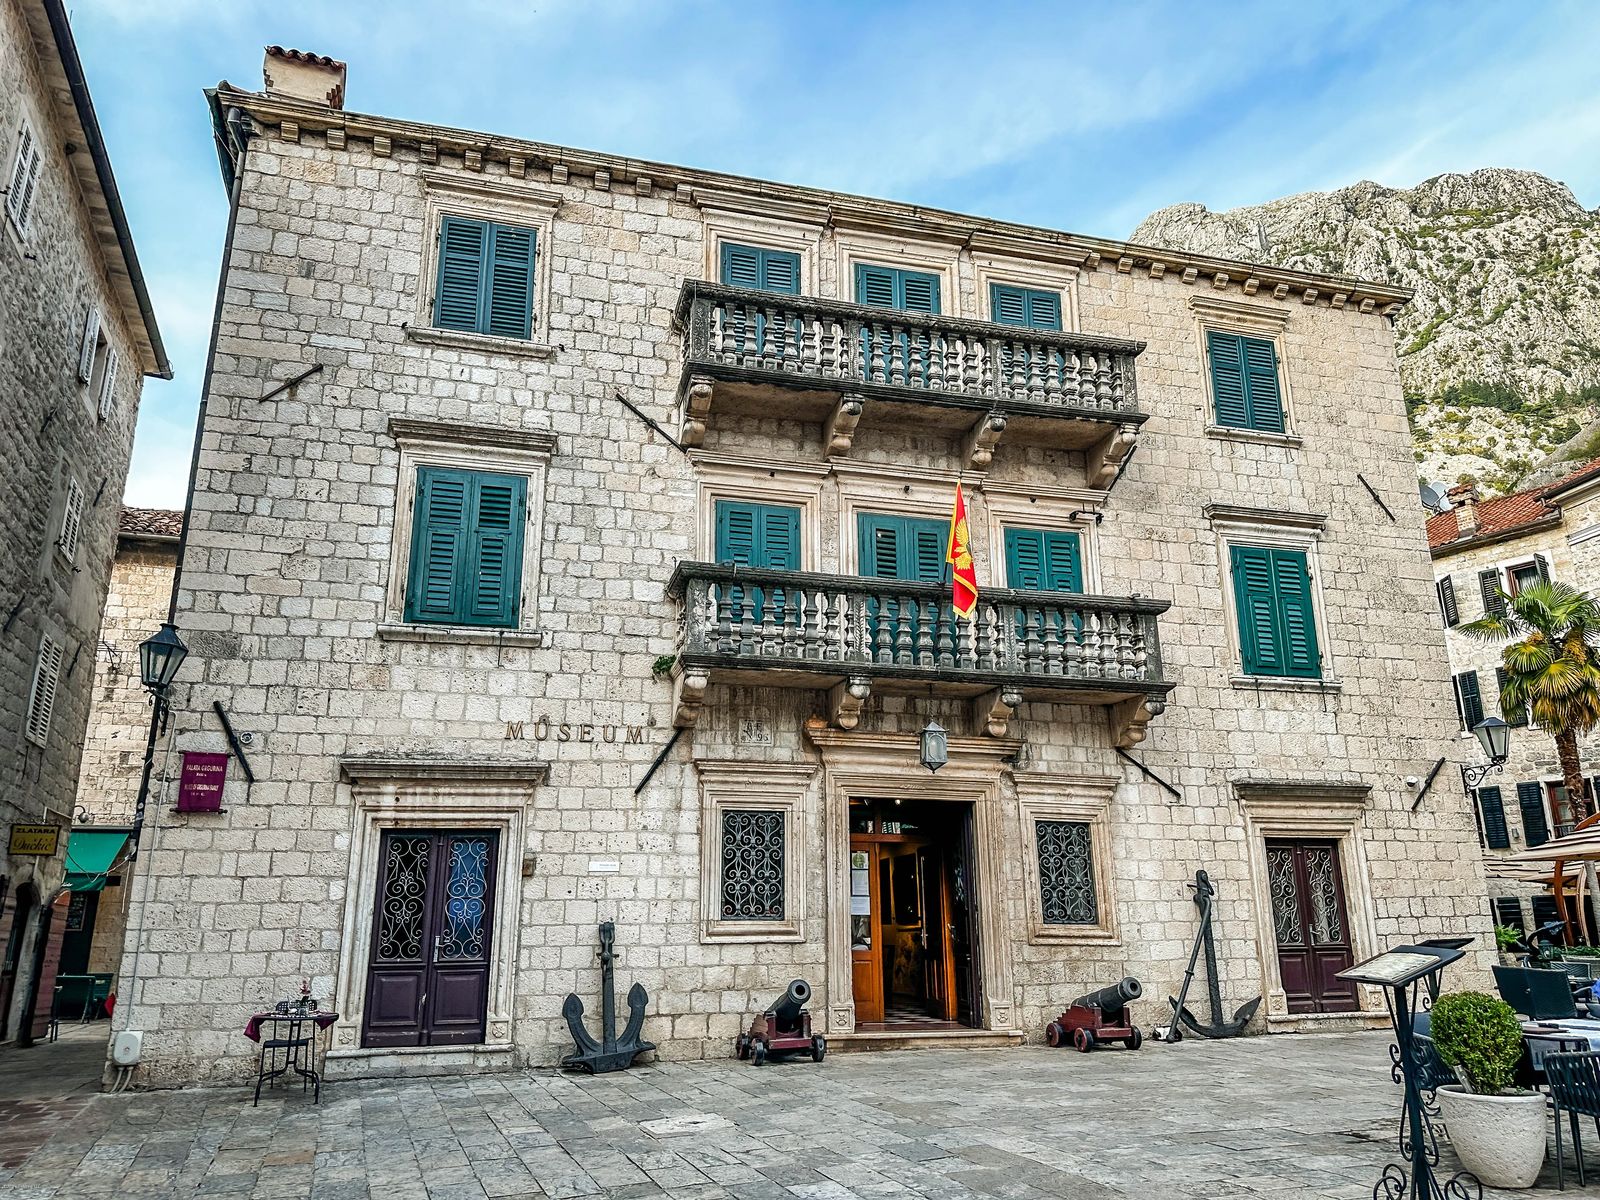 Maritime Museum - Things To See In Kotor Montenegro